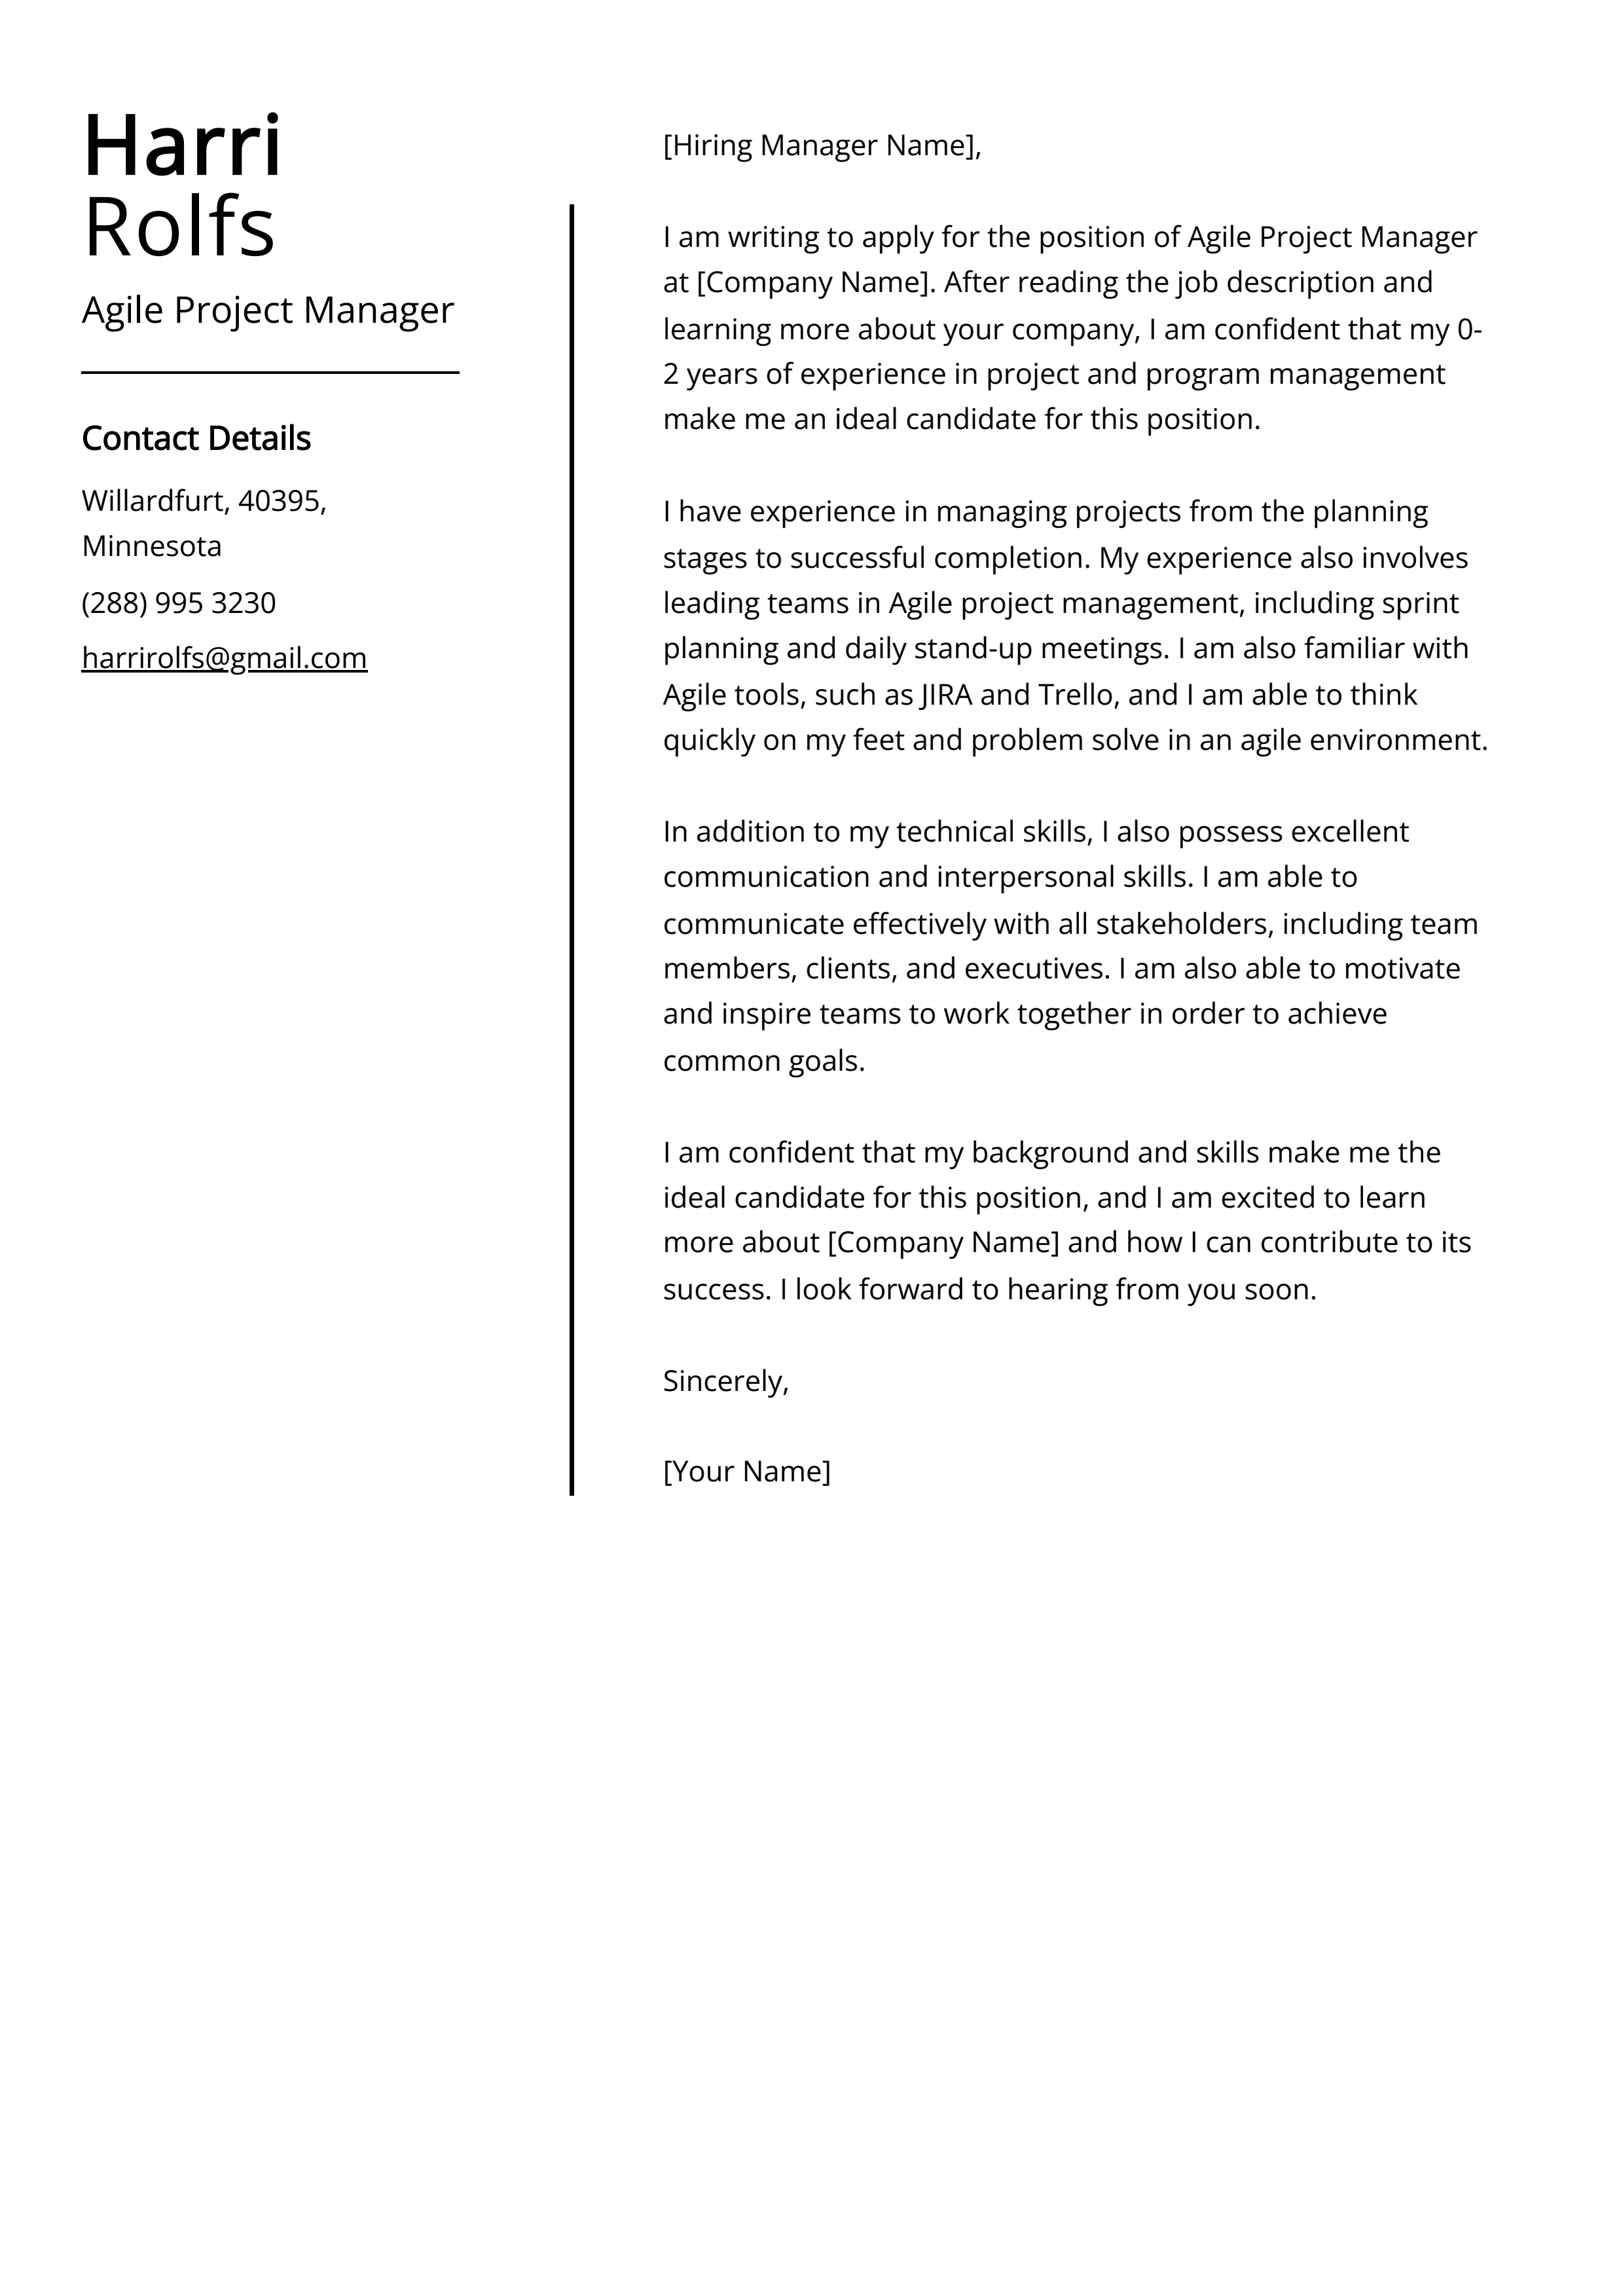 Agile Project Manager Cover Letter Example